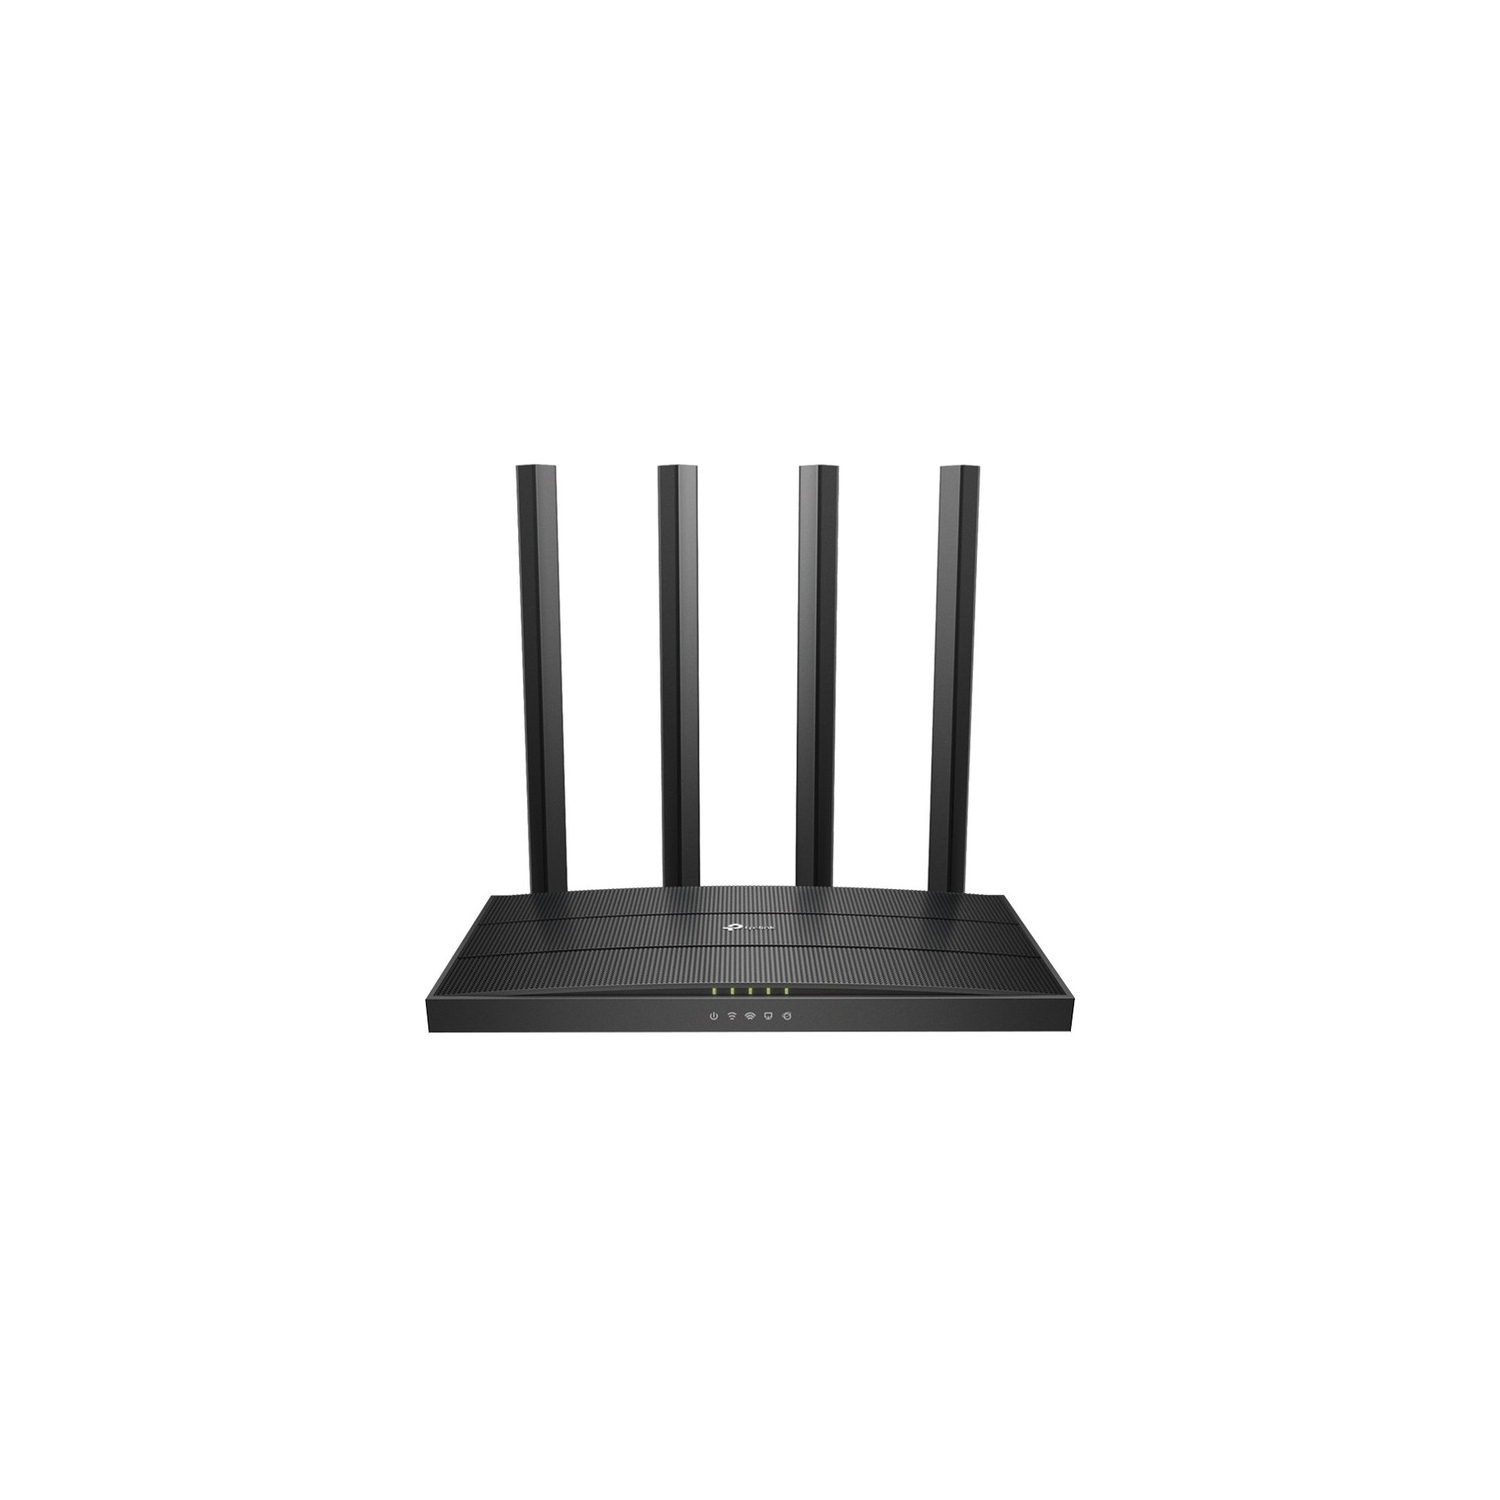 TP-LINK ARCHER C80 IEEE 802.11AC ETHERNET WIRELESS ROUTER